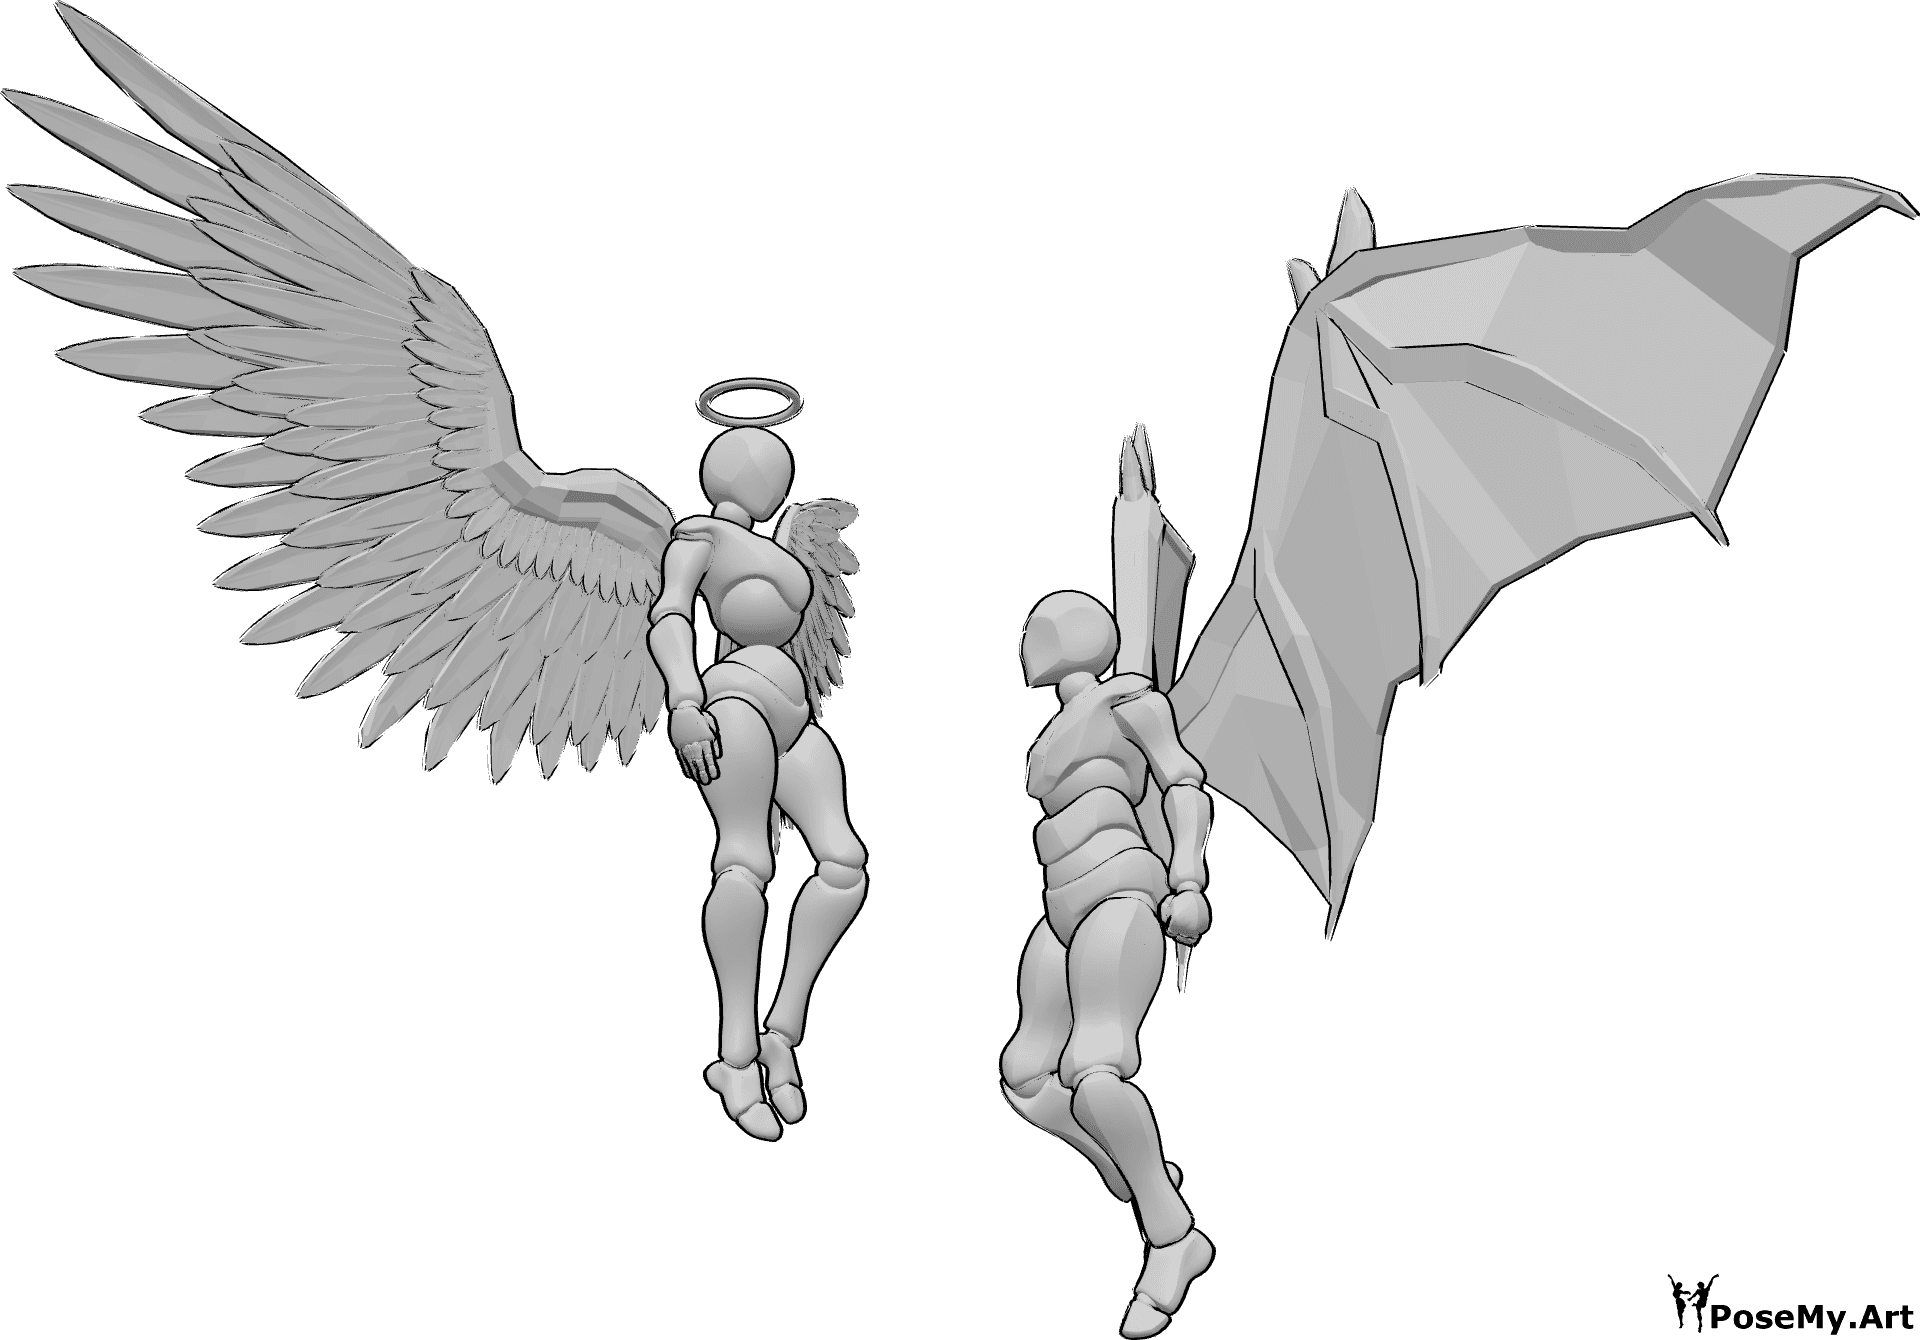 Pose Reference- Angel and demon pose - Female angel and male demon are floating in the air and looking at each other, the angel is looking down on him, the male is clenching his fists